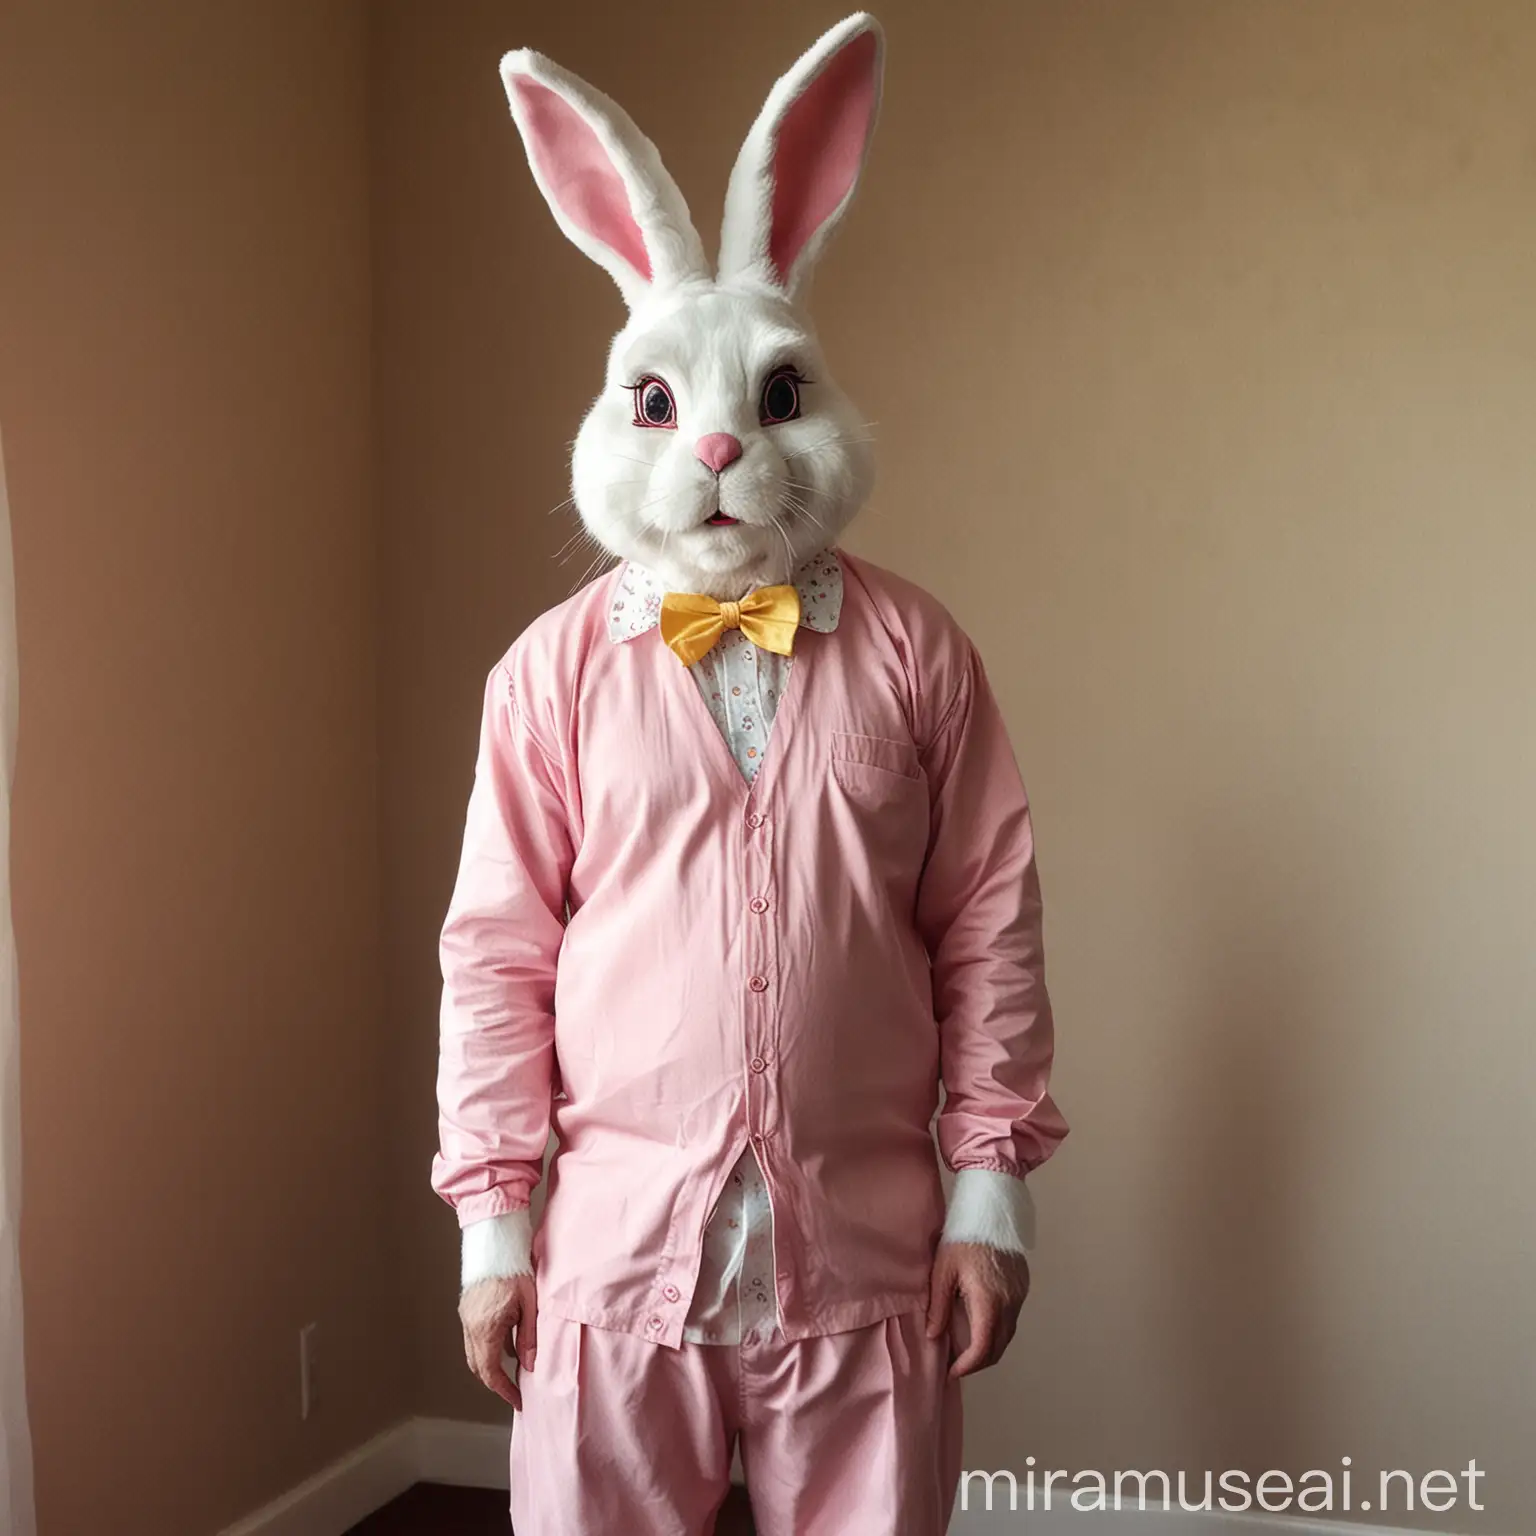 Easter Bunny in Human Form Whimsical Transformation Artwork